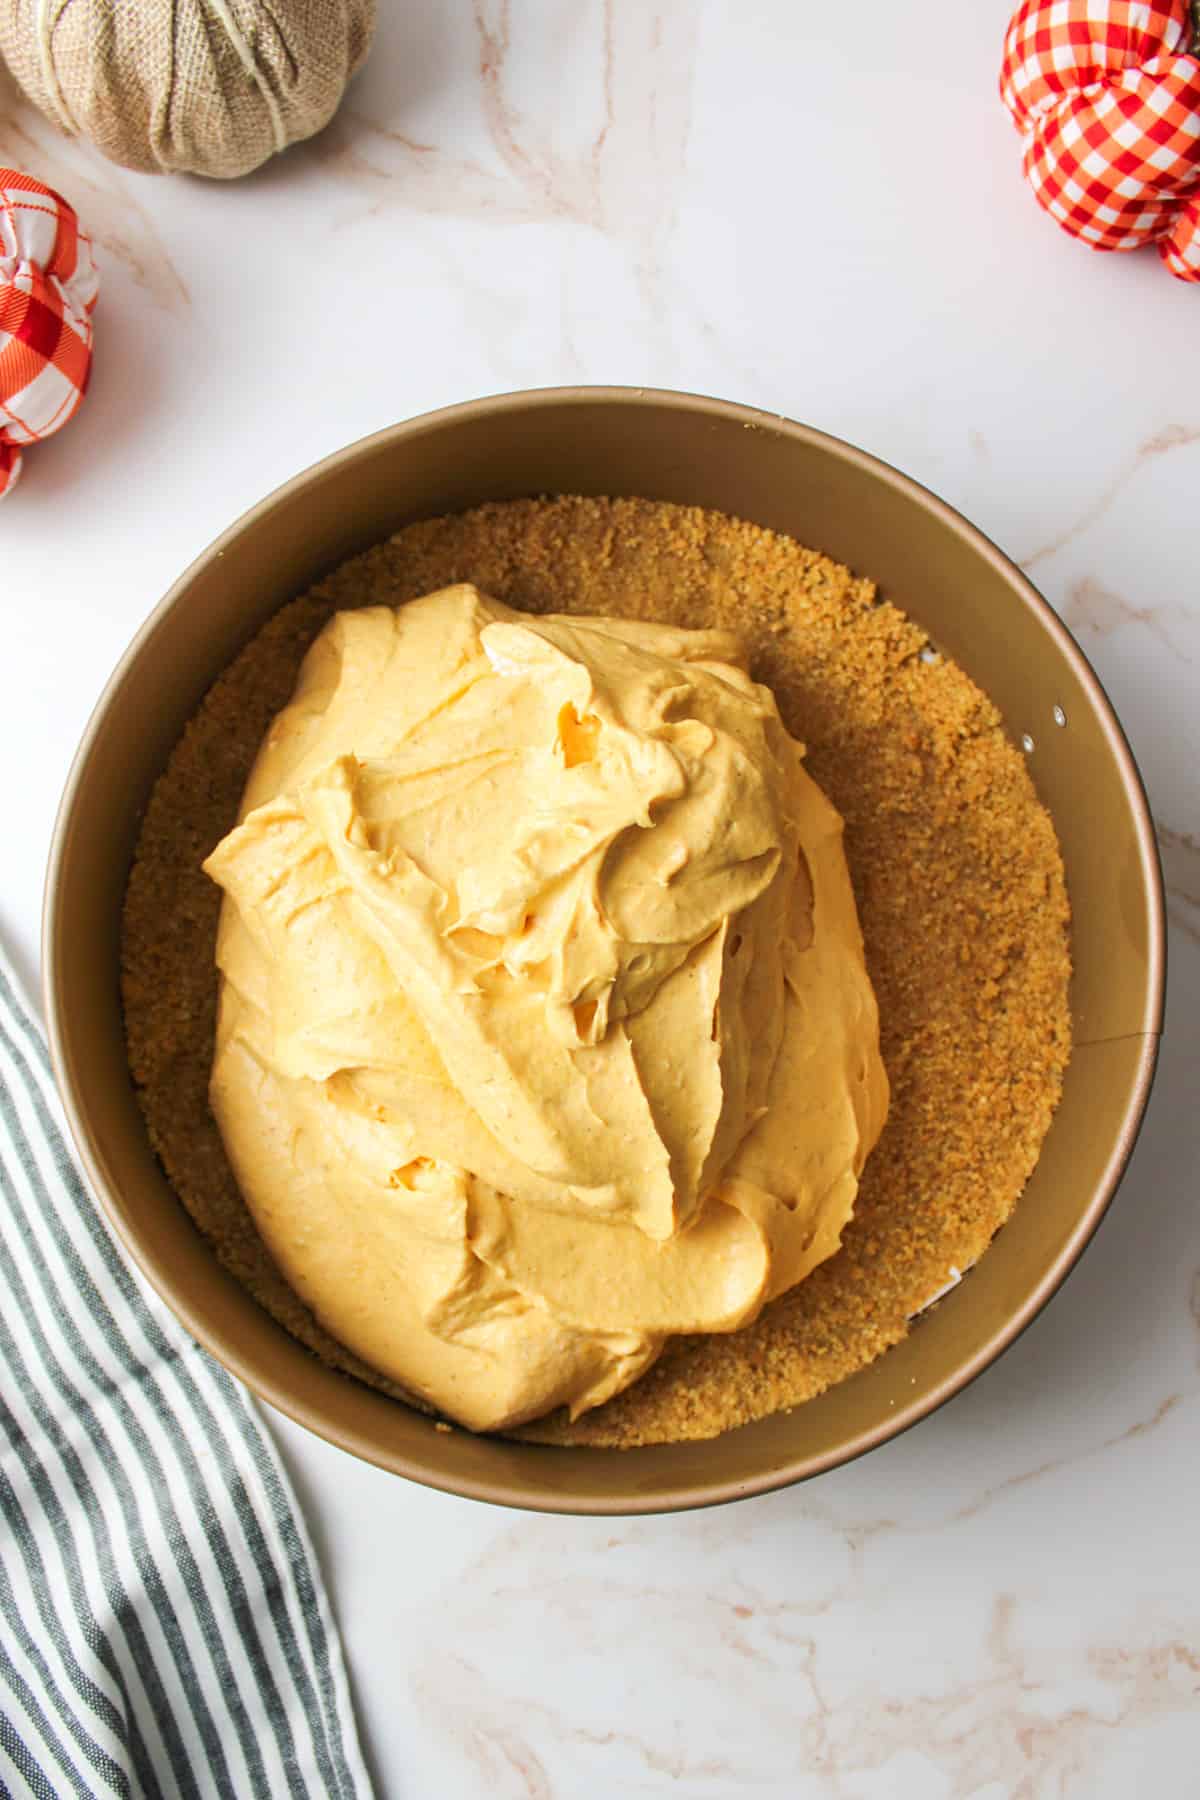 no bake pumpkin cheesecake filling piled on top of a pressed graham cracker crust